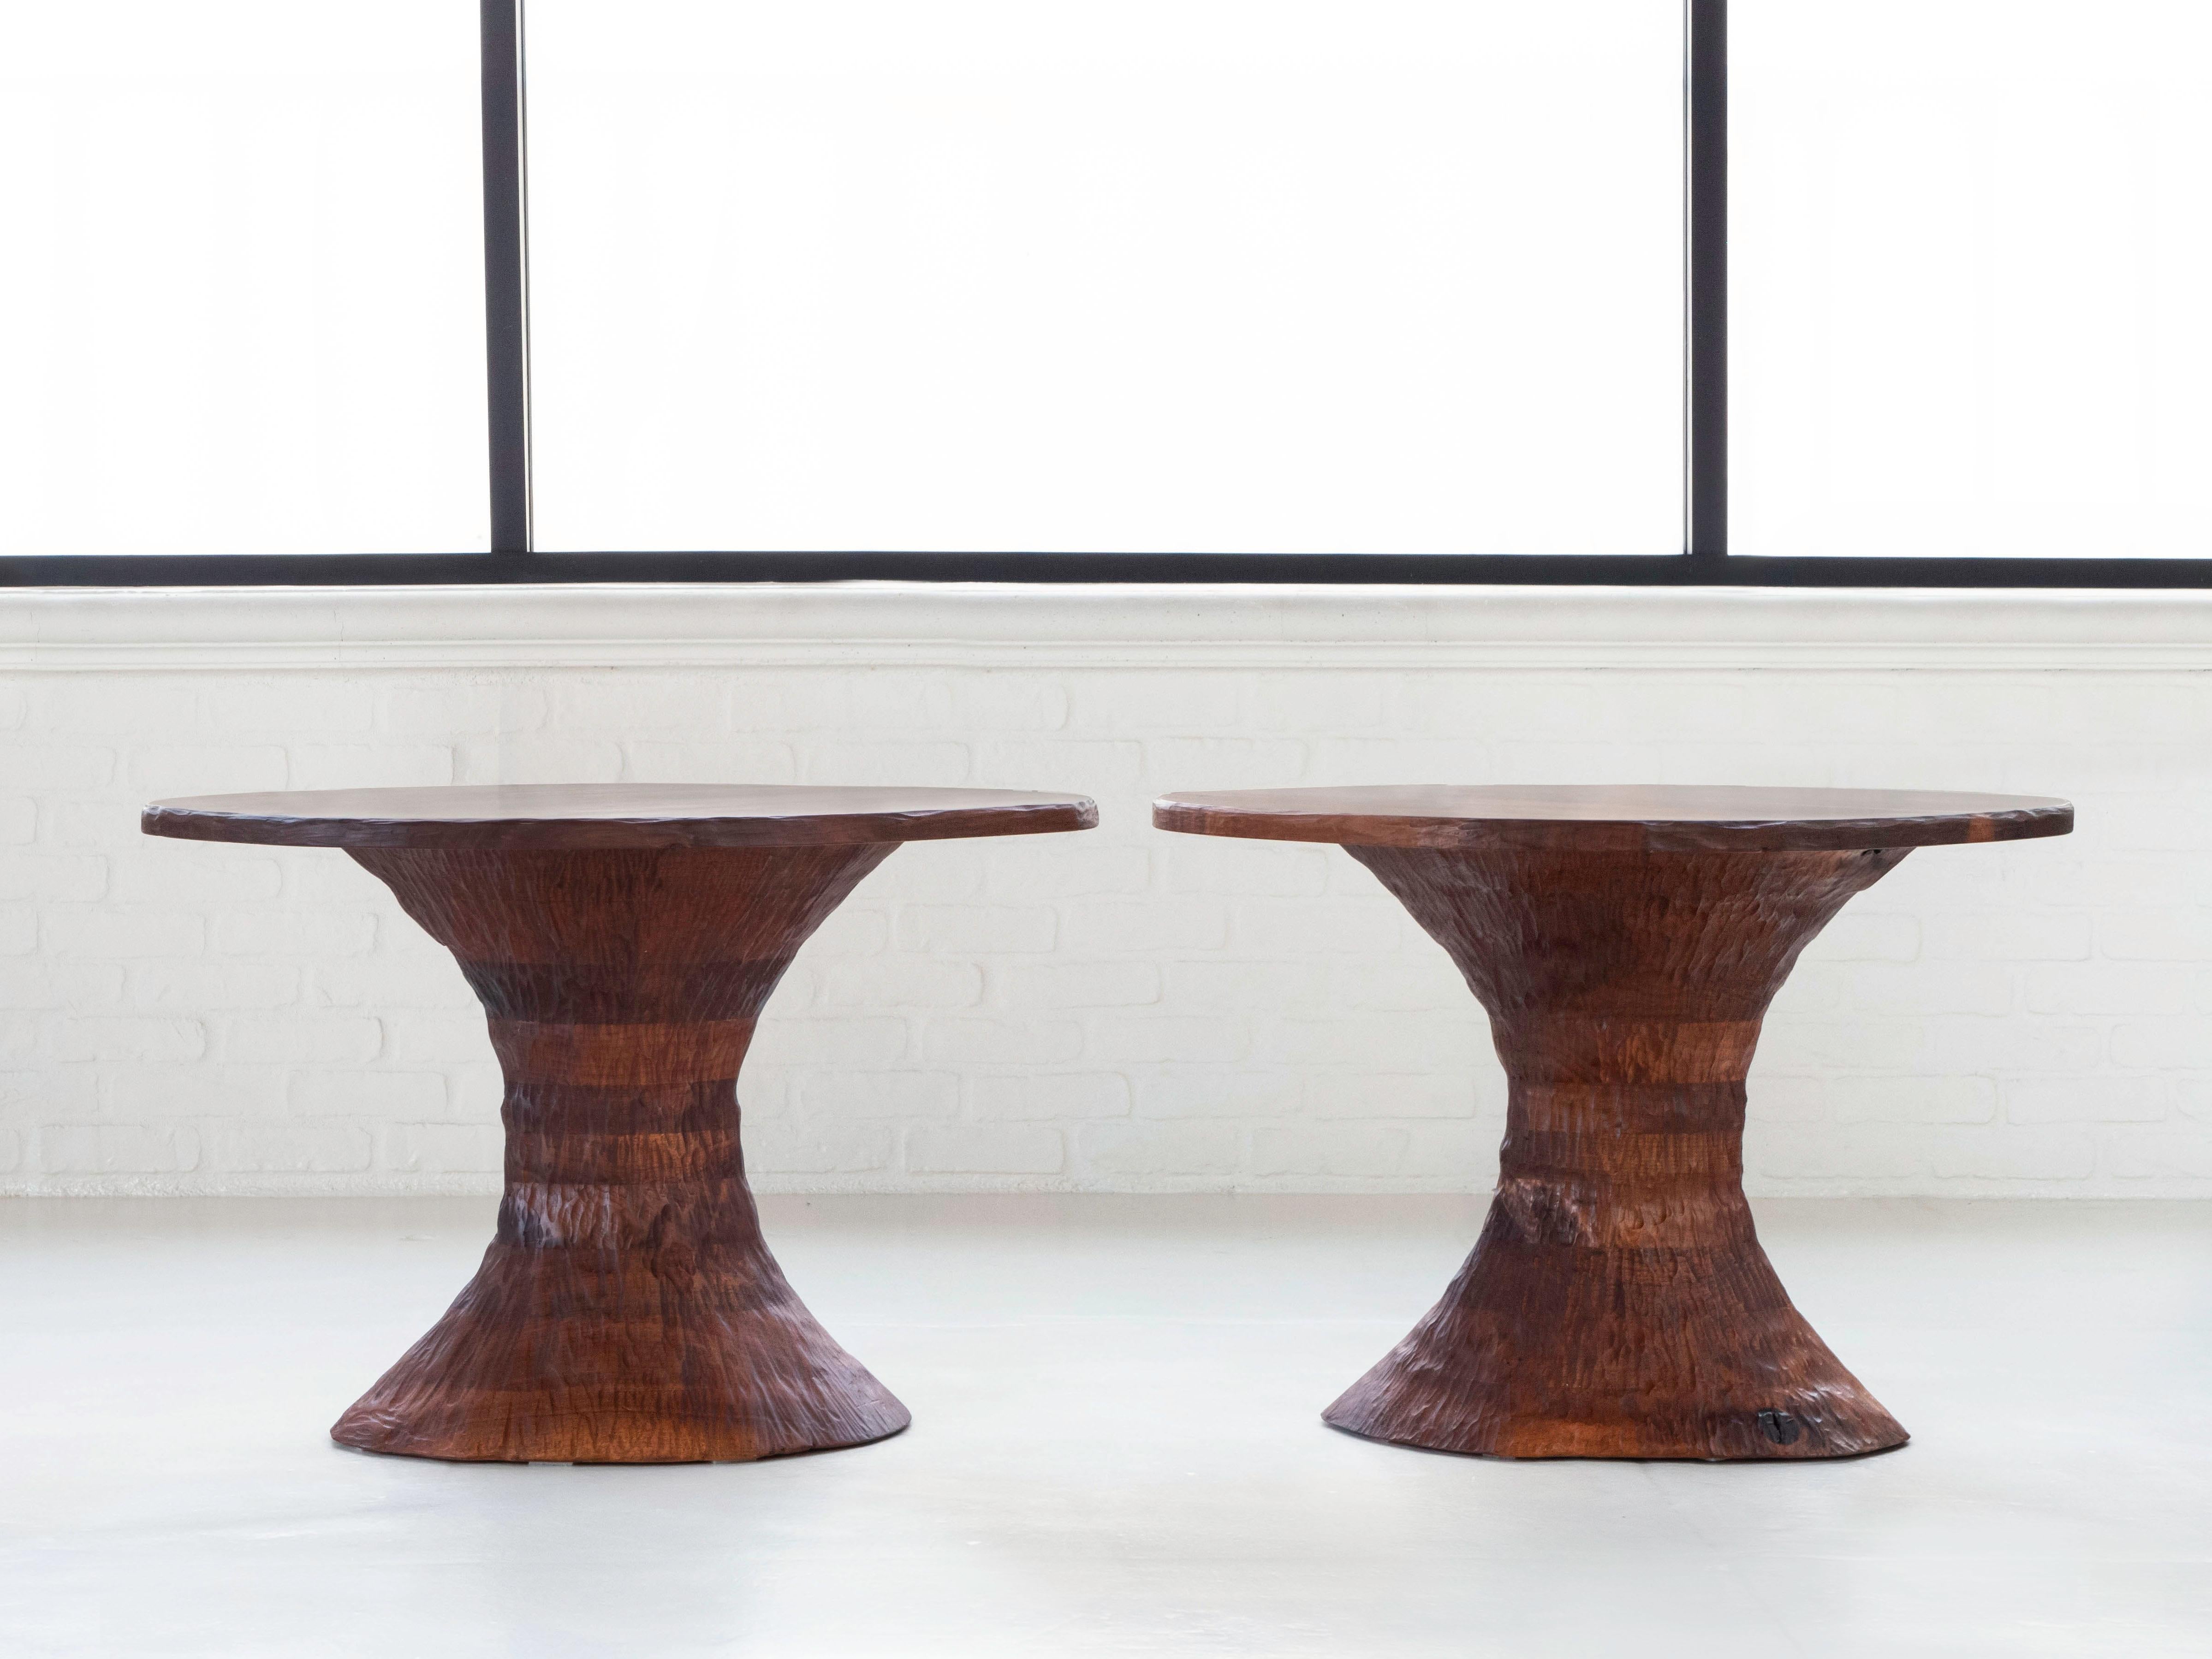 This pair of side tables were crafted by Phillip Lloyd Powell, circa 1960's. It is likely that the tables were commissioned as mates showing relatively similar shape and dimensions. The surfaces of both tables have book matched grain and each have 4